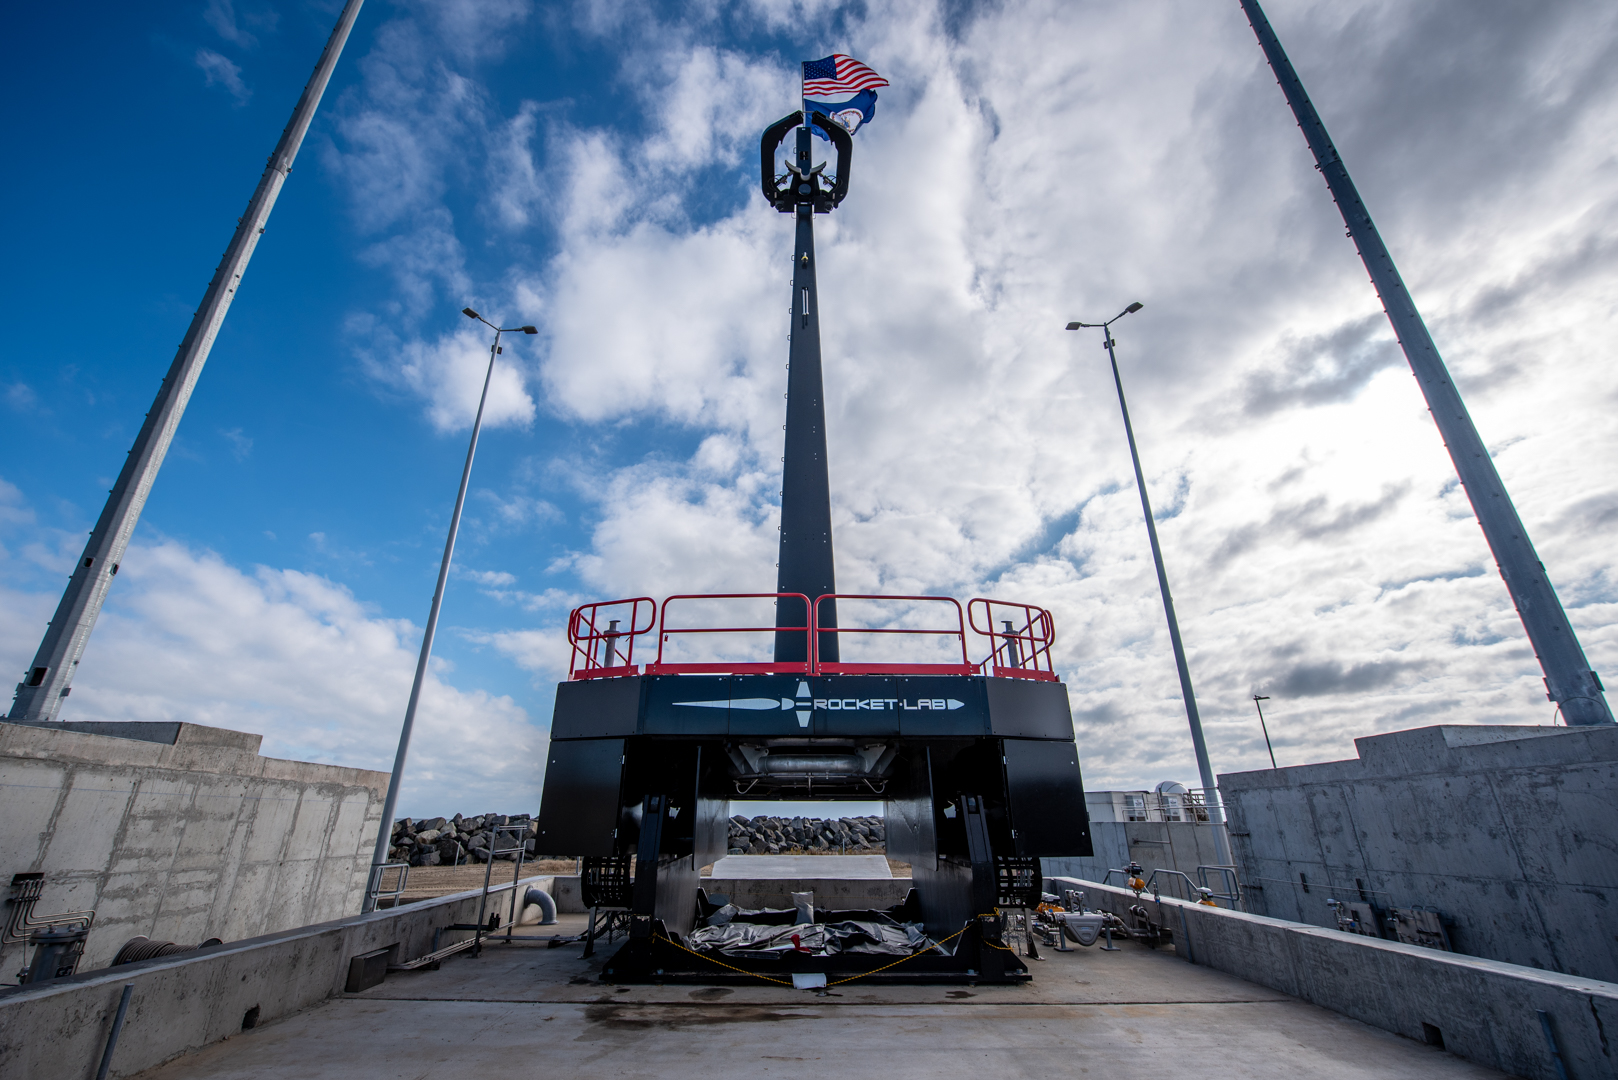 Rocket Lab’s second launch site, Launch Complex 2 at the Mid-Atlantic Regional Spaceport at NASA’s Wallops Flight Facility